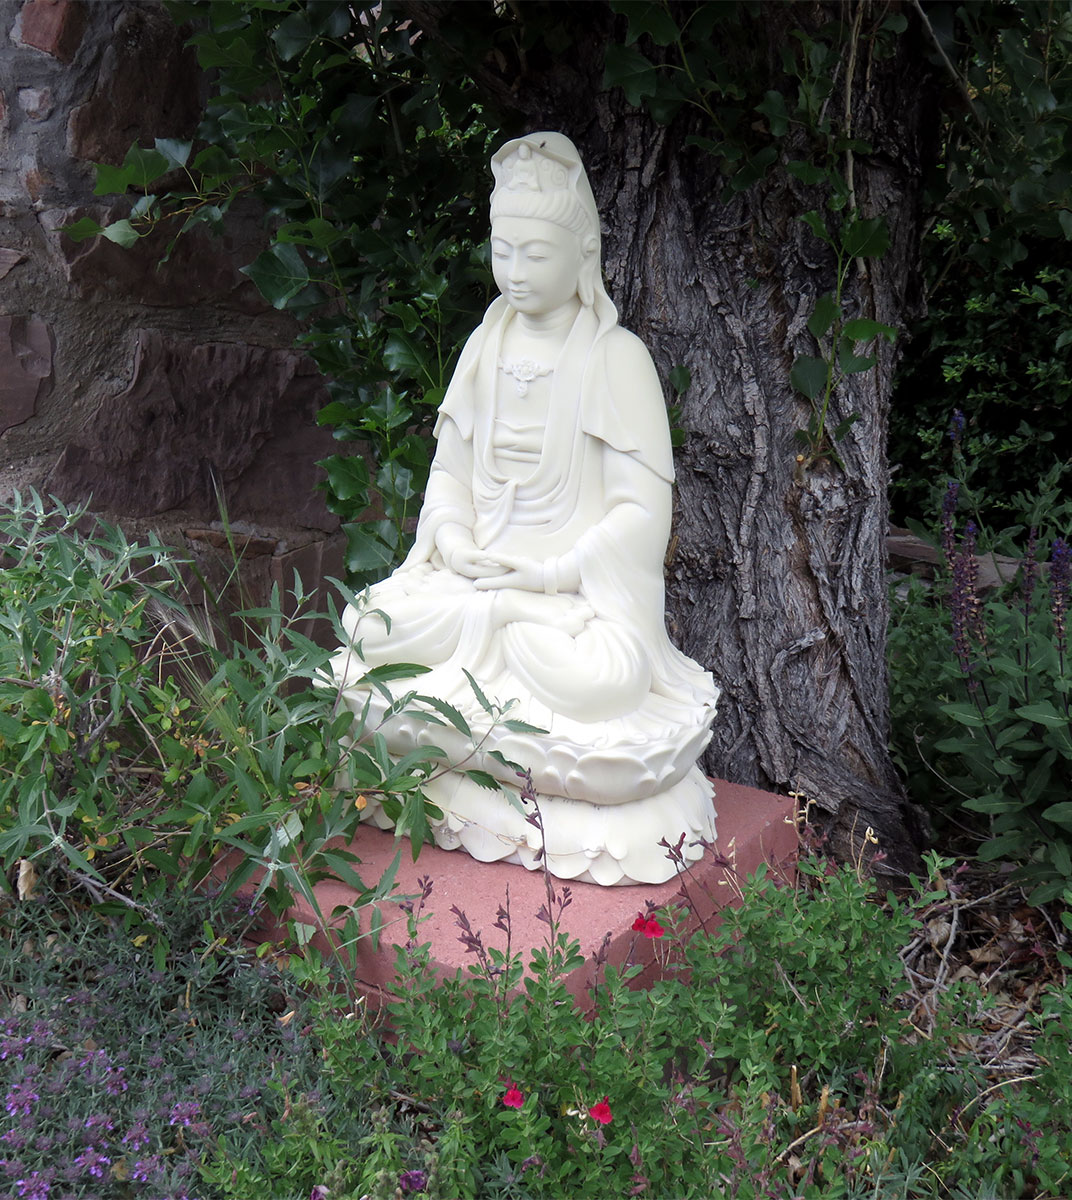 Kwan Yin in our front Garden